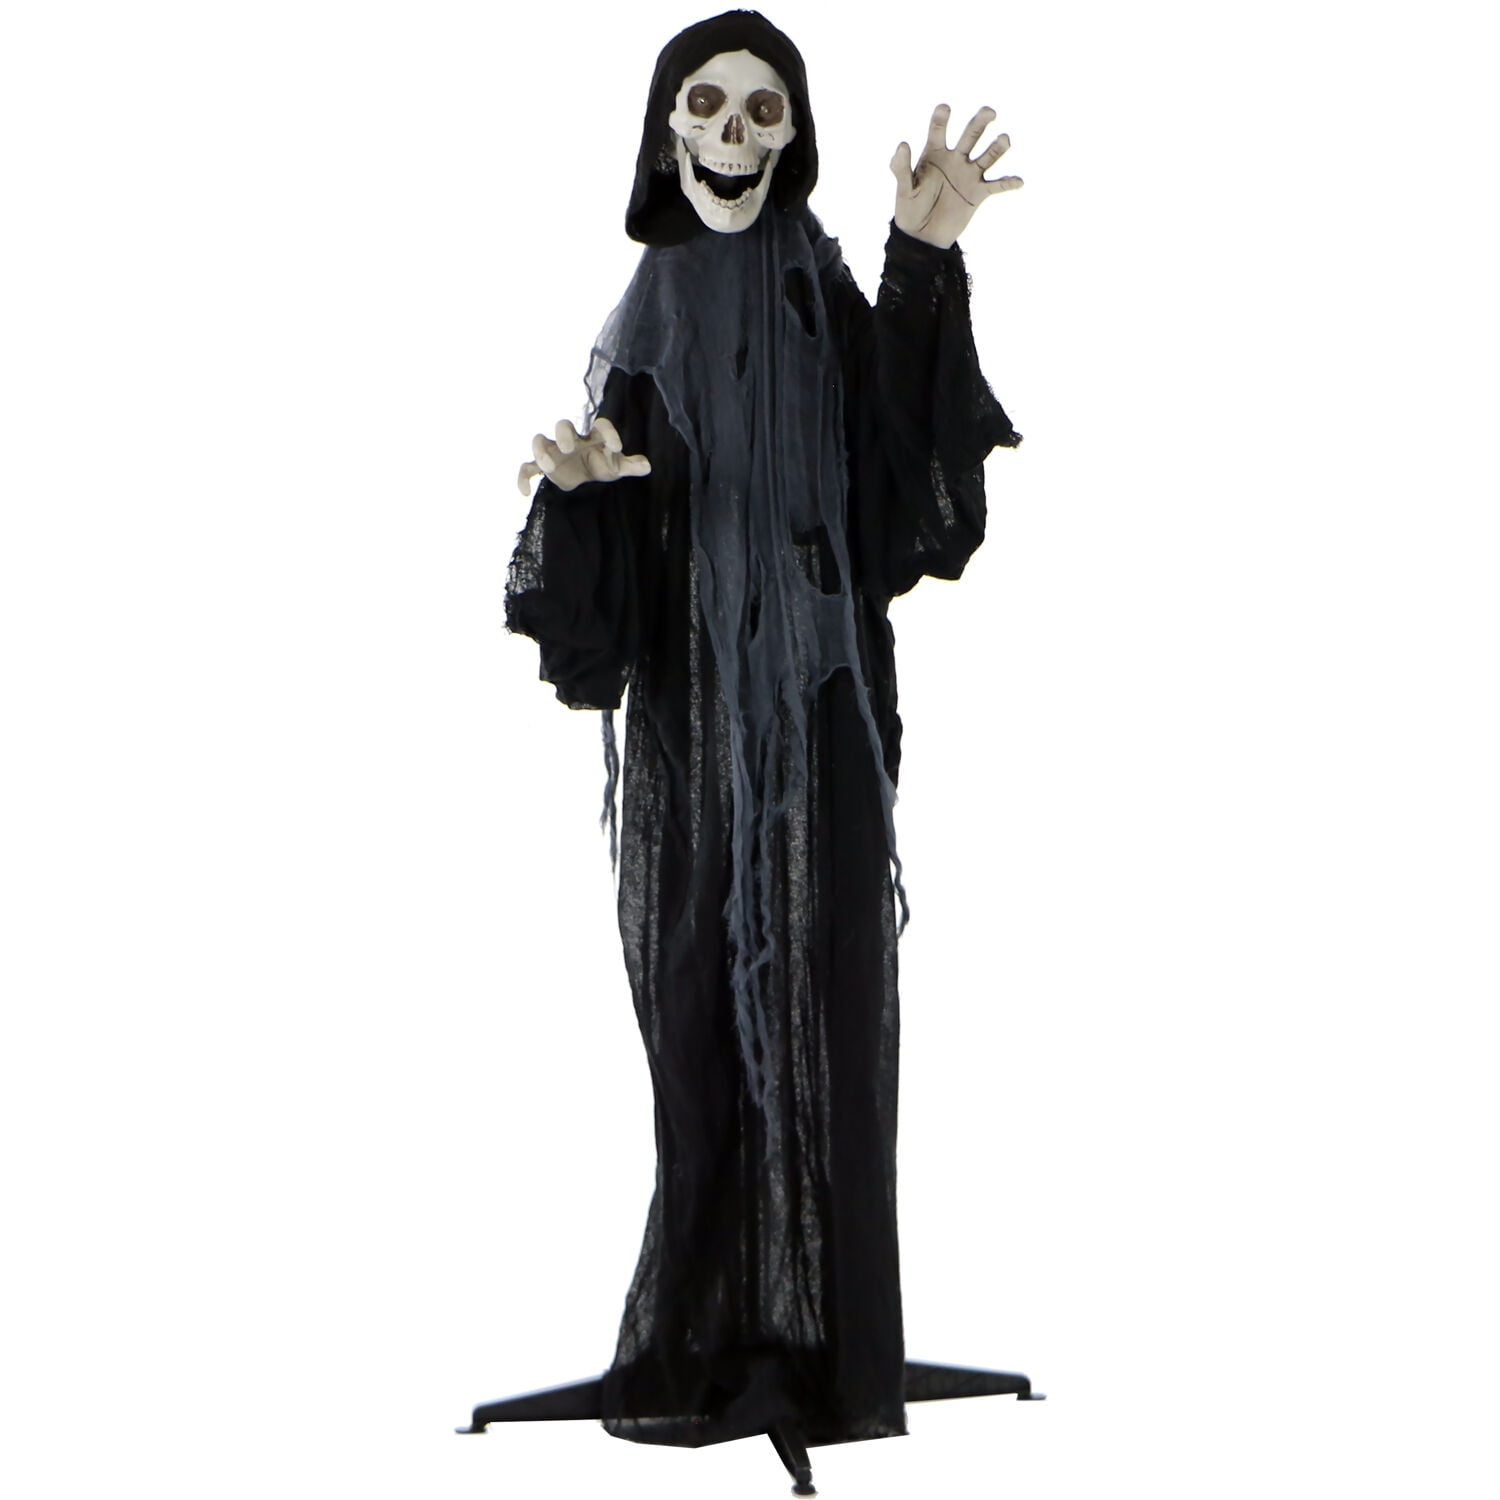 ODOMY 165cm Halloween Life Size Skeleton Poseable Decoration Full Body Bones Prop Hanging Human Skull Ornament Model For Anatomical Learning Aid Art Shooting Halloween Graveyard Cosplay Party